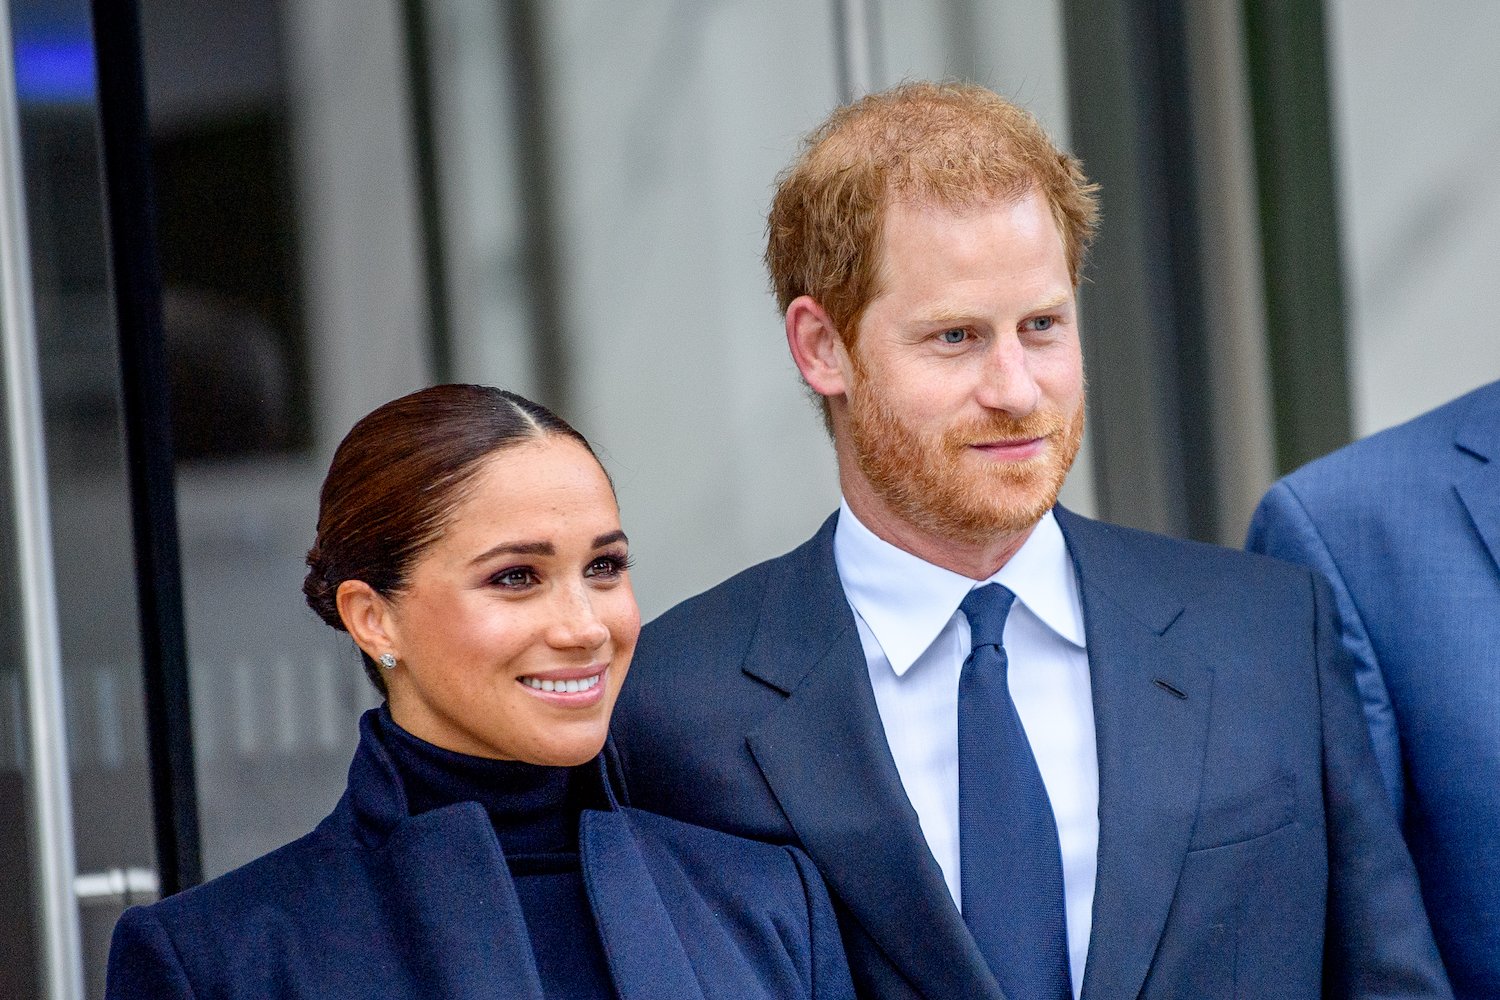 Prince Harry and Meghan Markle stand next to each other and smile.